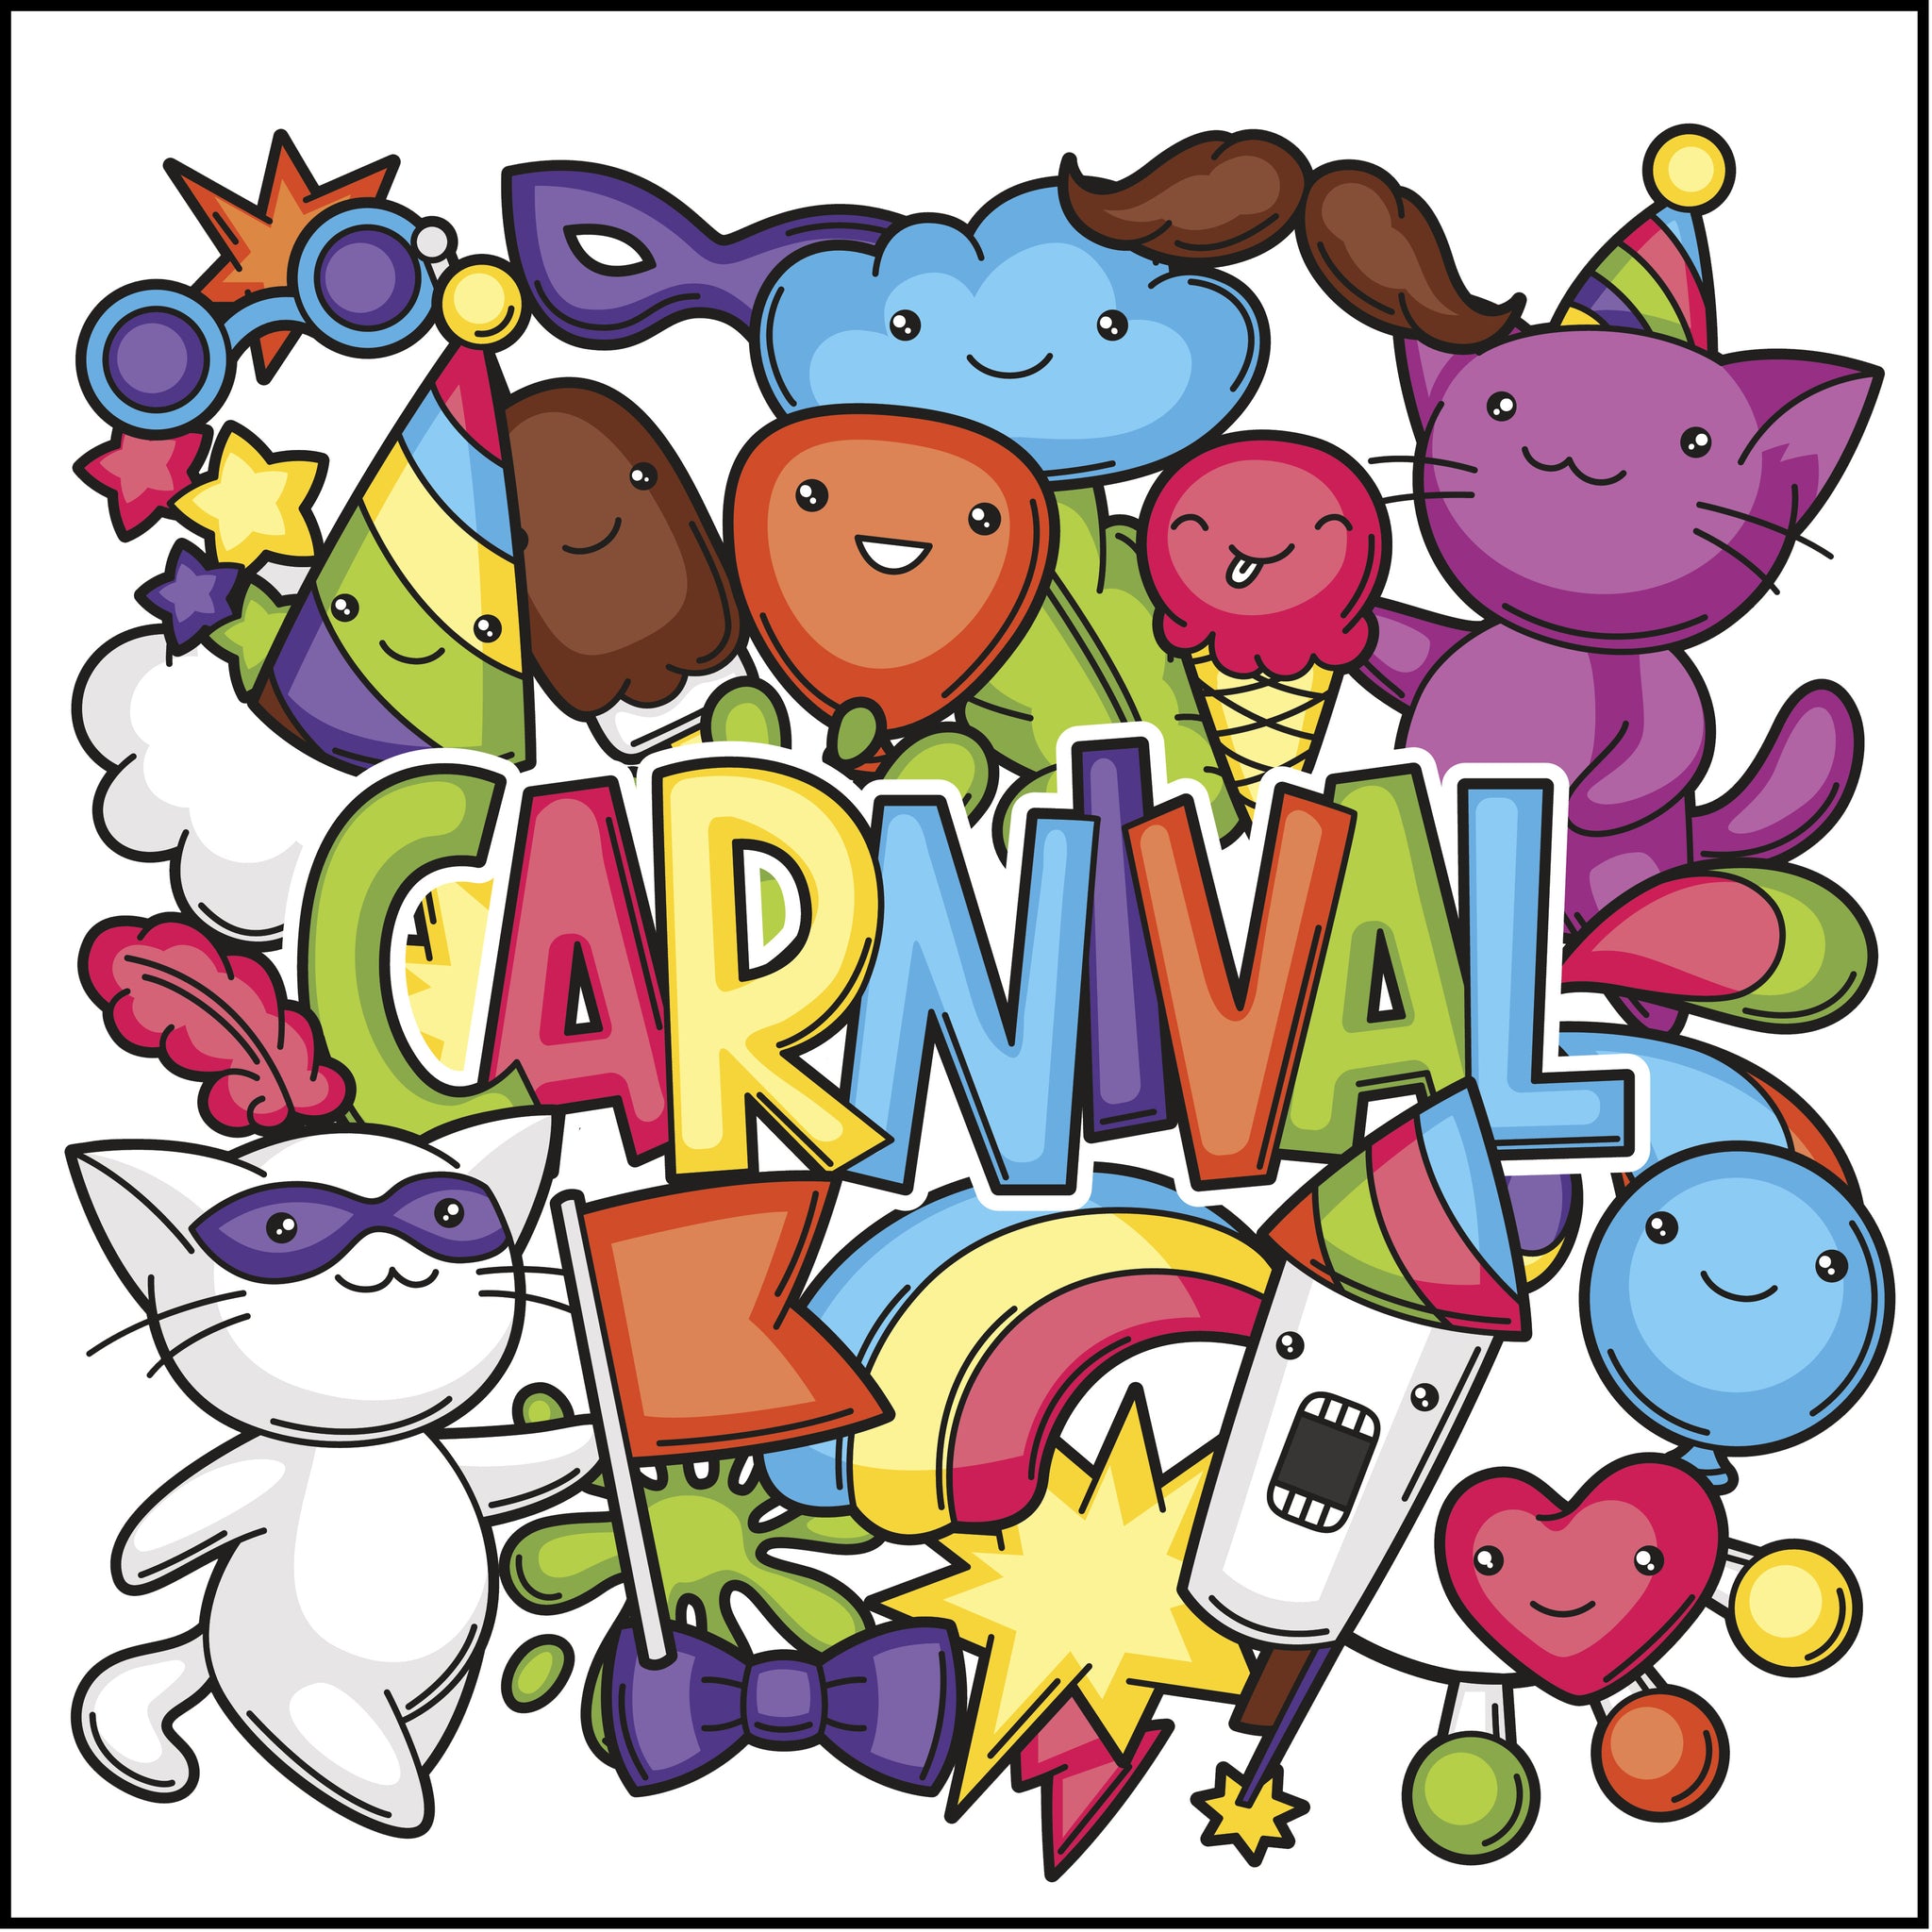 Carnival of Happy Kitty Cat and Rainbow Emojis Vinyl Decal Sticker